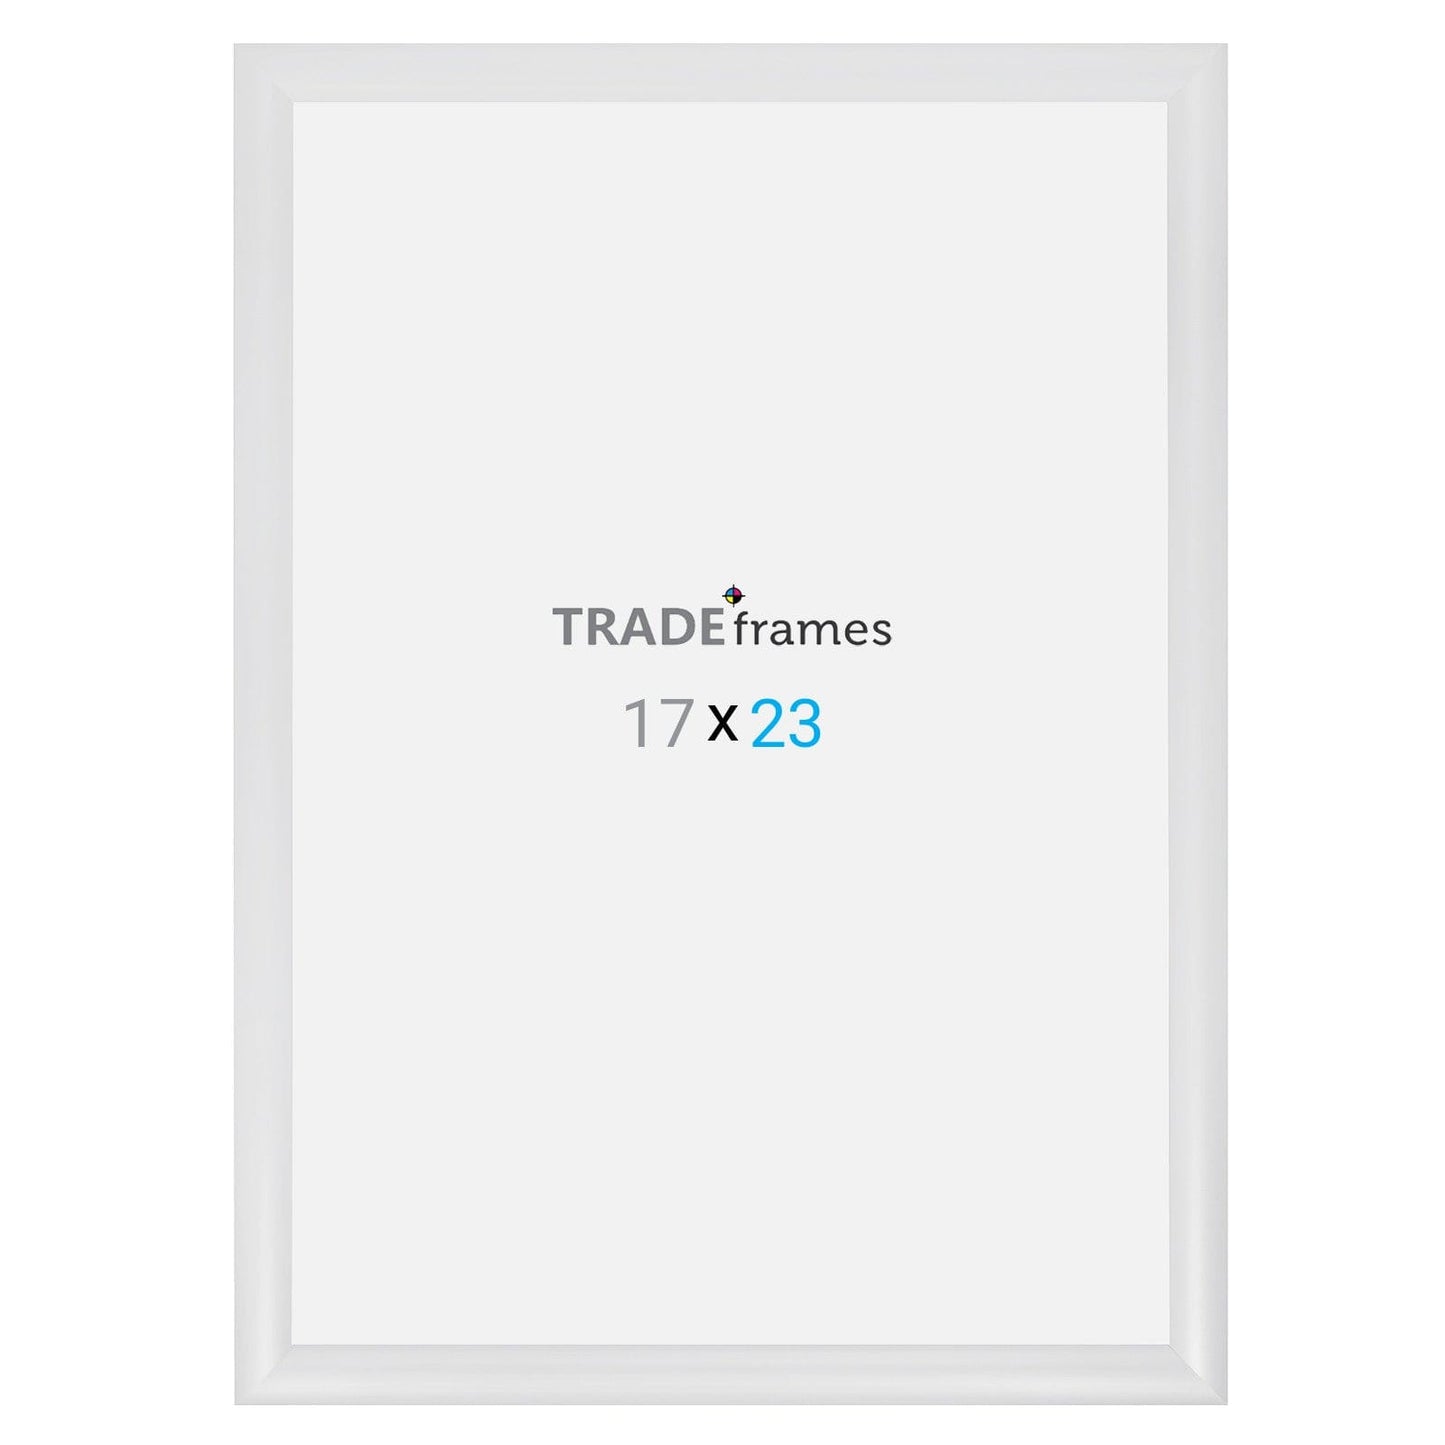 17x23 TRADEframe White Snap Frame 17x23 - 1.2 inch profile - Snap Frames Direct